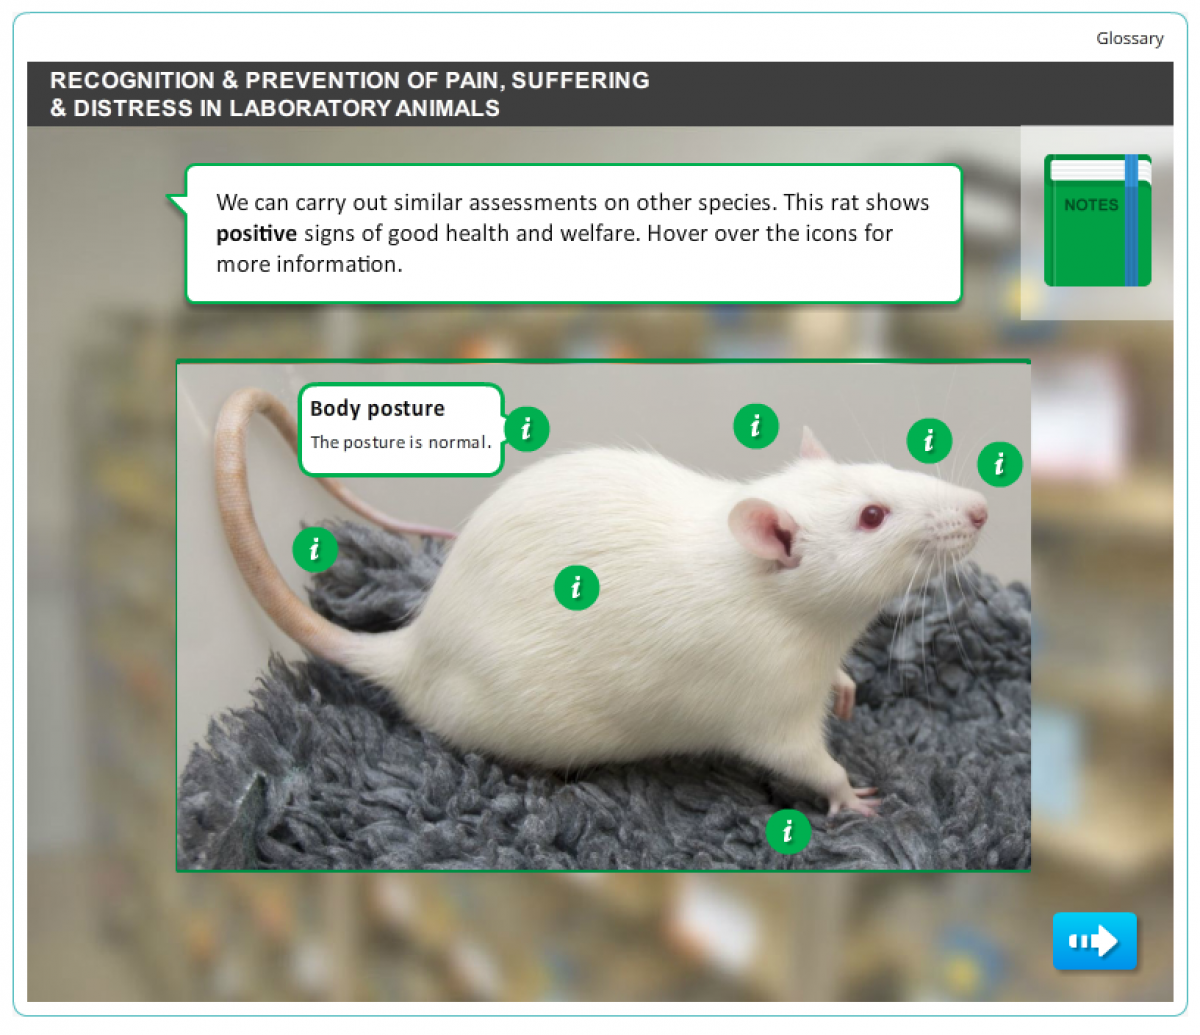  A screenshot of the recognition and prevention of pain, suffering and distress in laboratory animals. It show a rat with the message body posture and markers